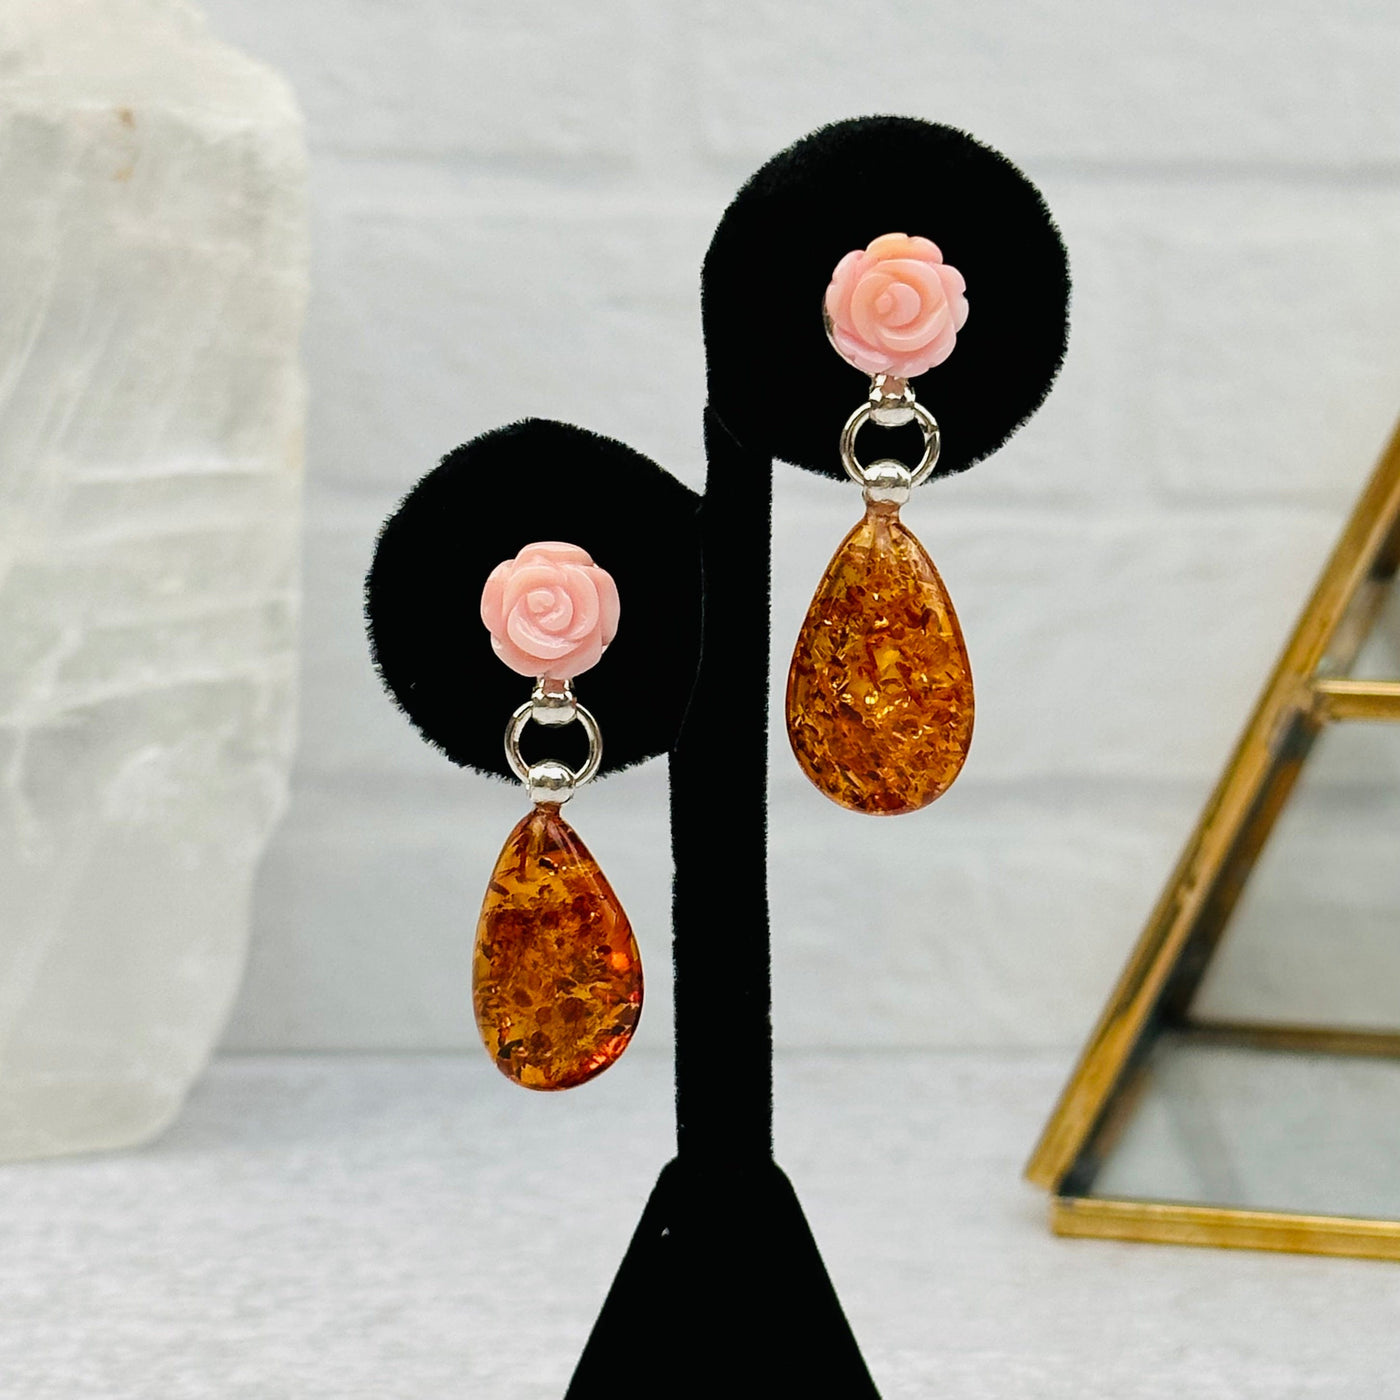 amber earrings with pink rose accents 